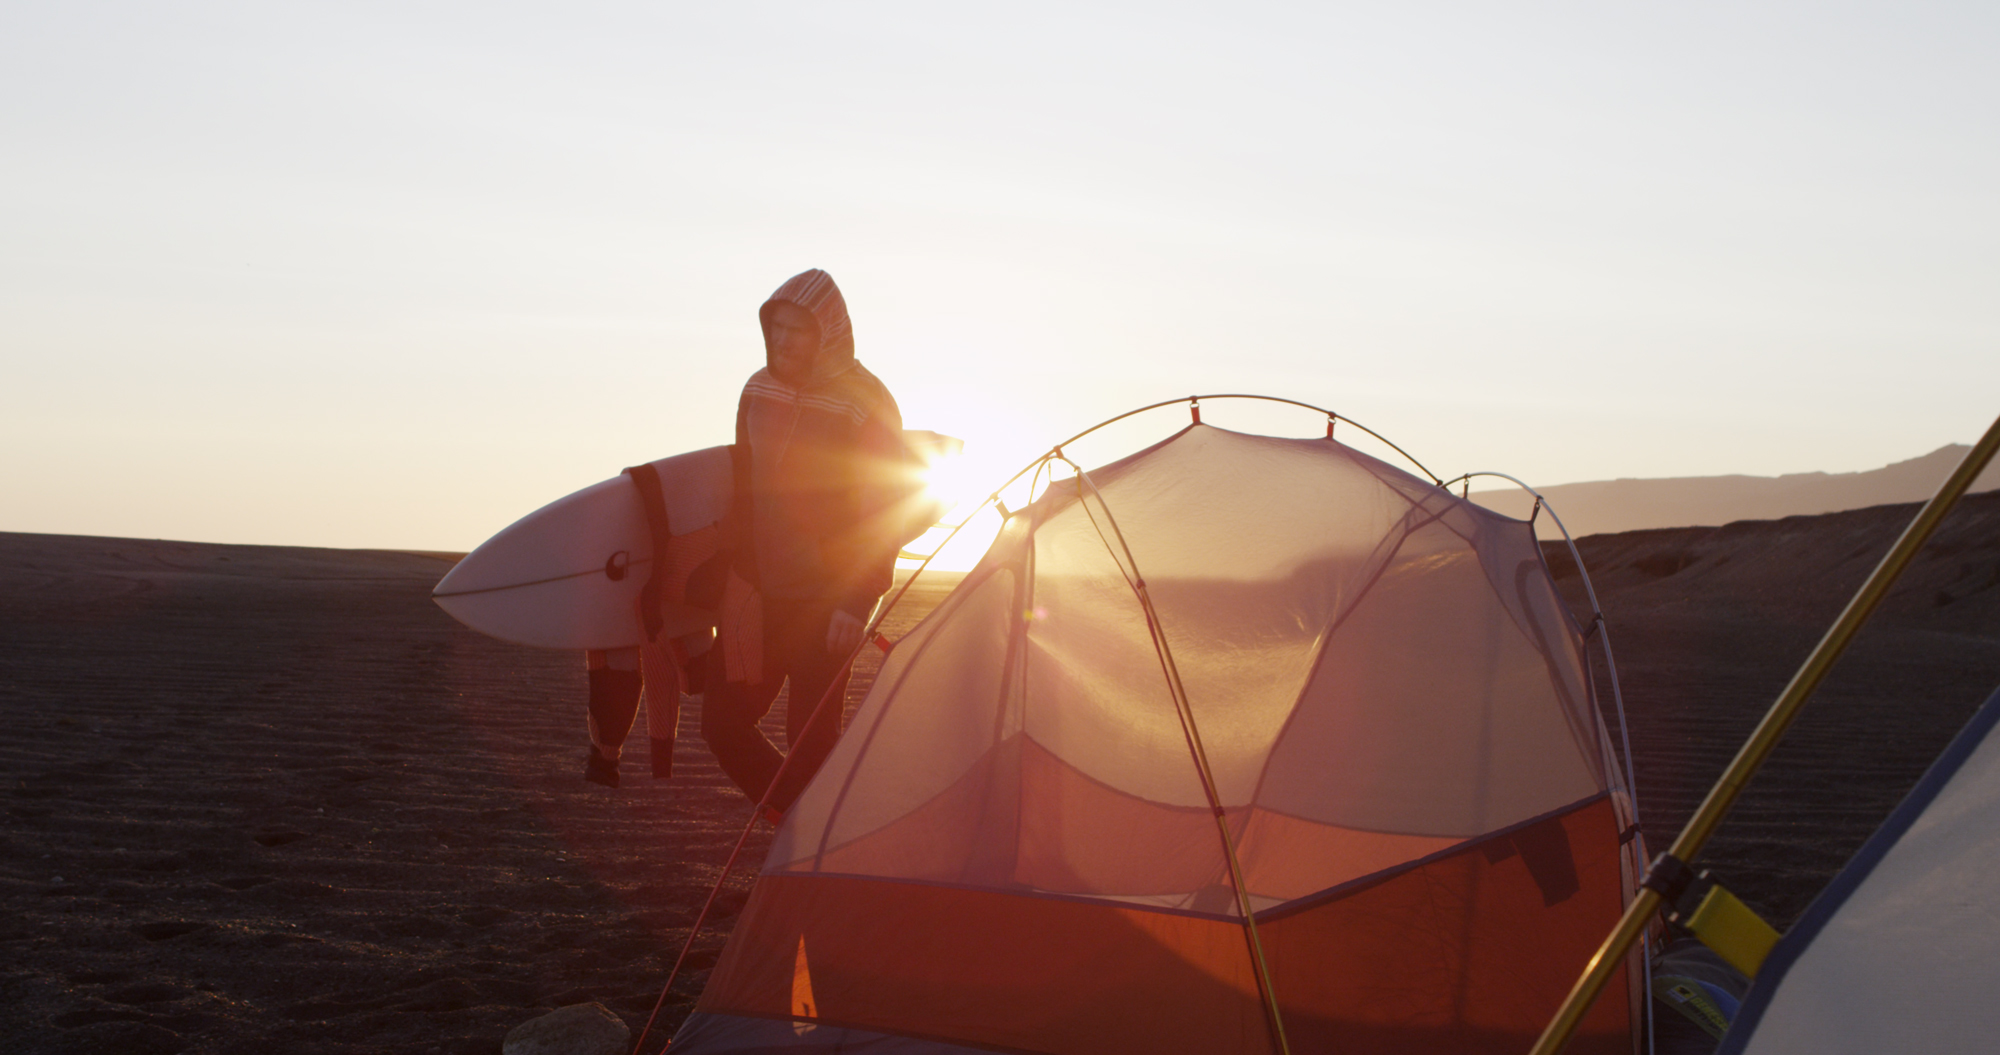 The Mountainsmith Mountain Dome tent in the film YOW: Icelandic for yes